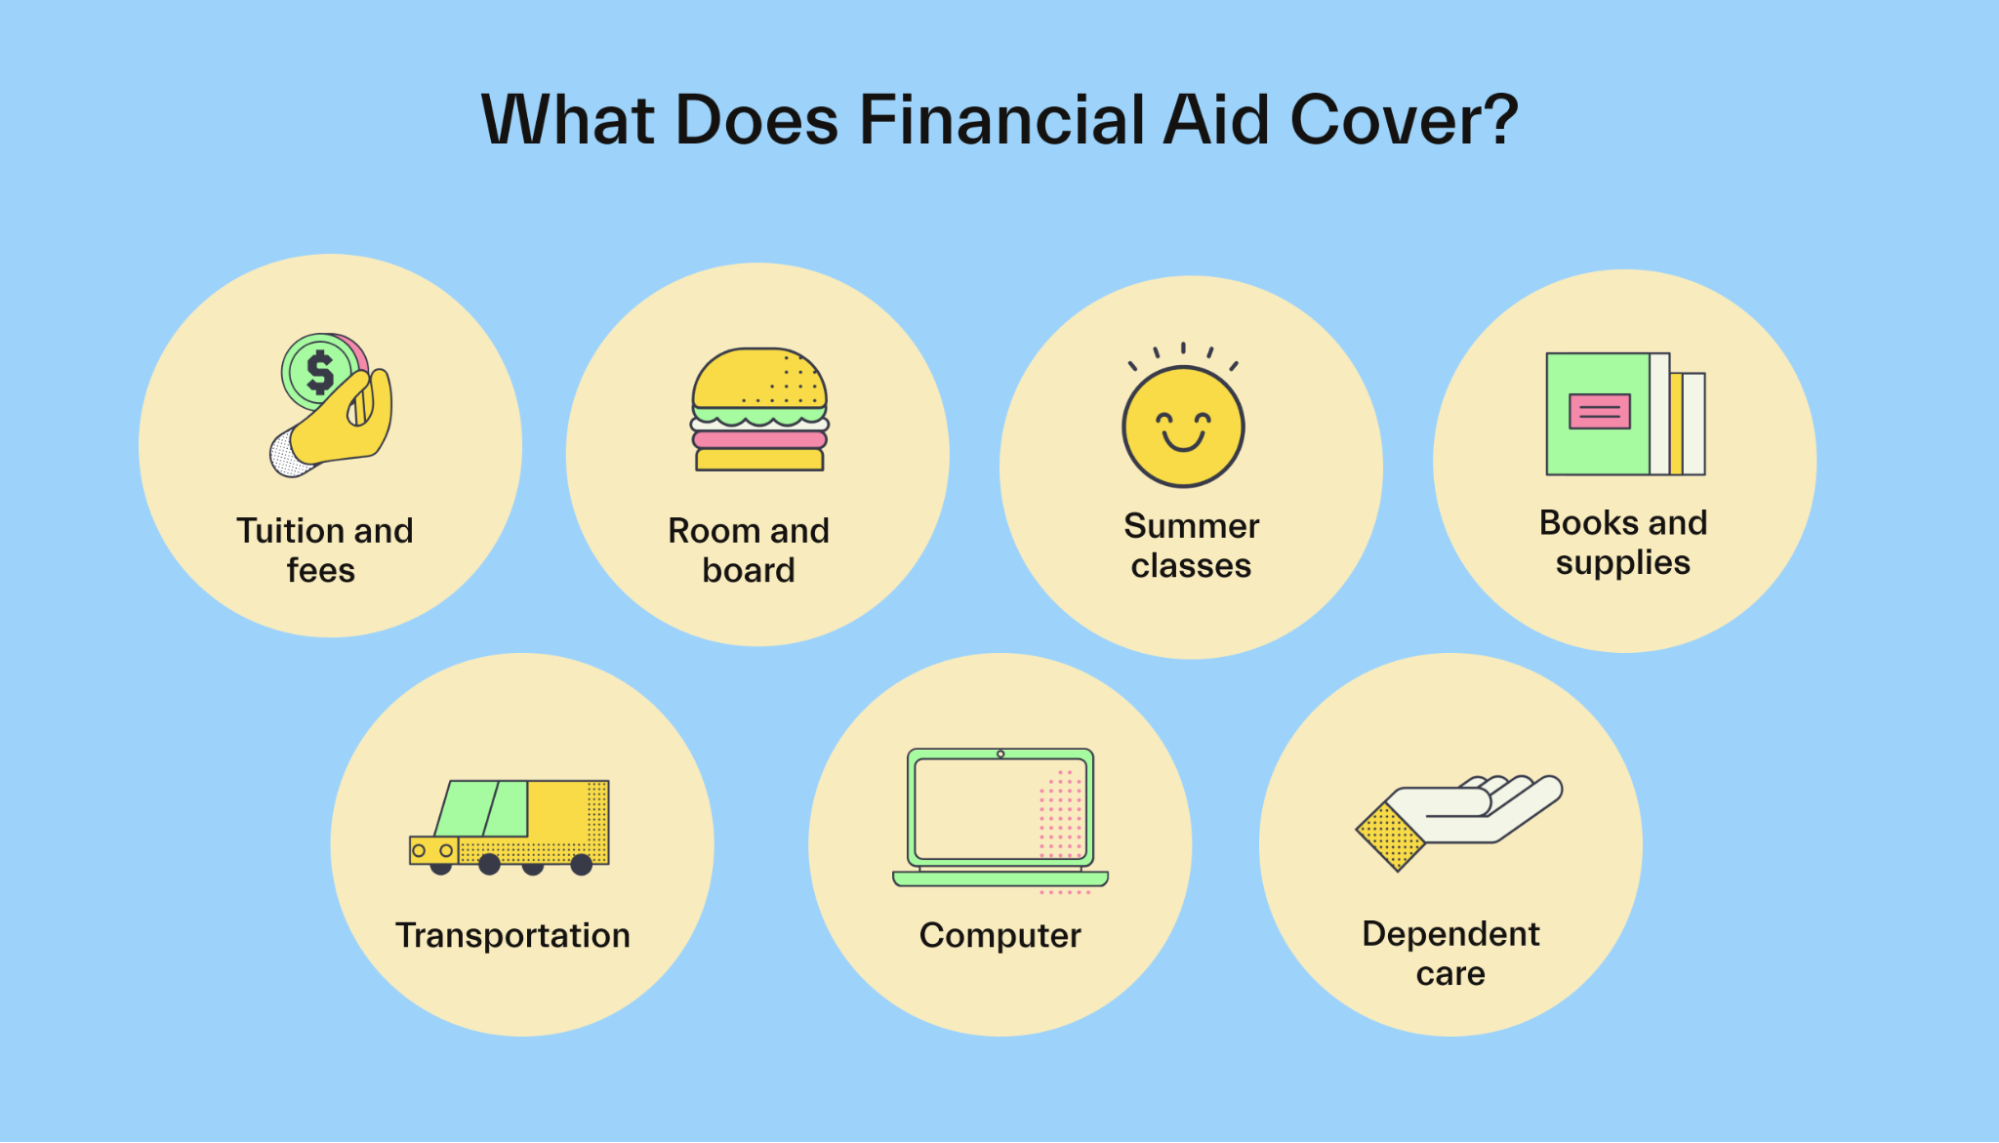 What Does Financial Aid Cover?